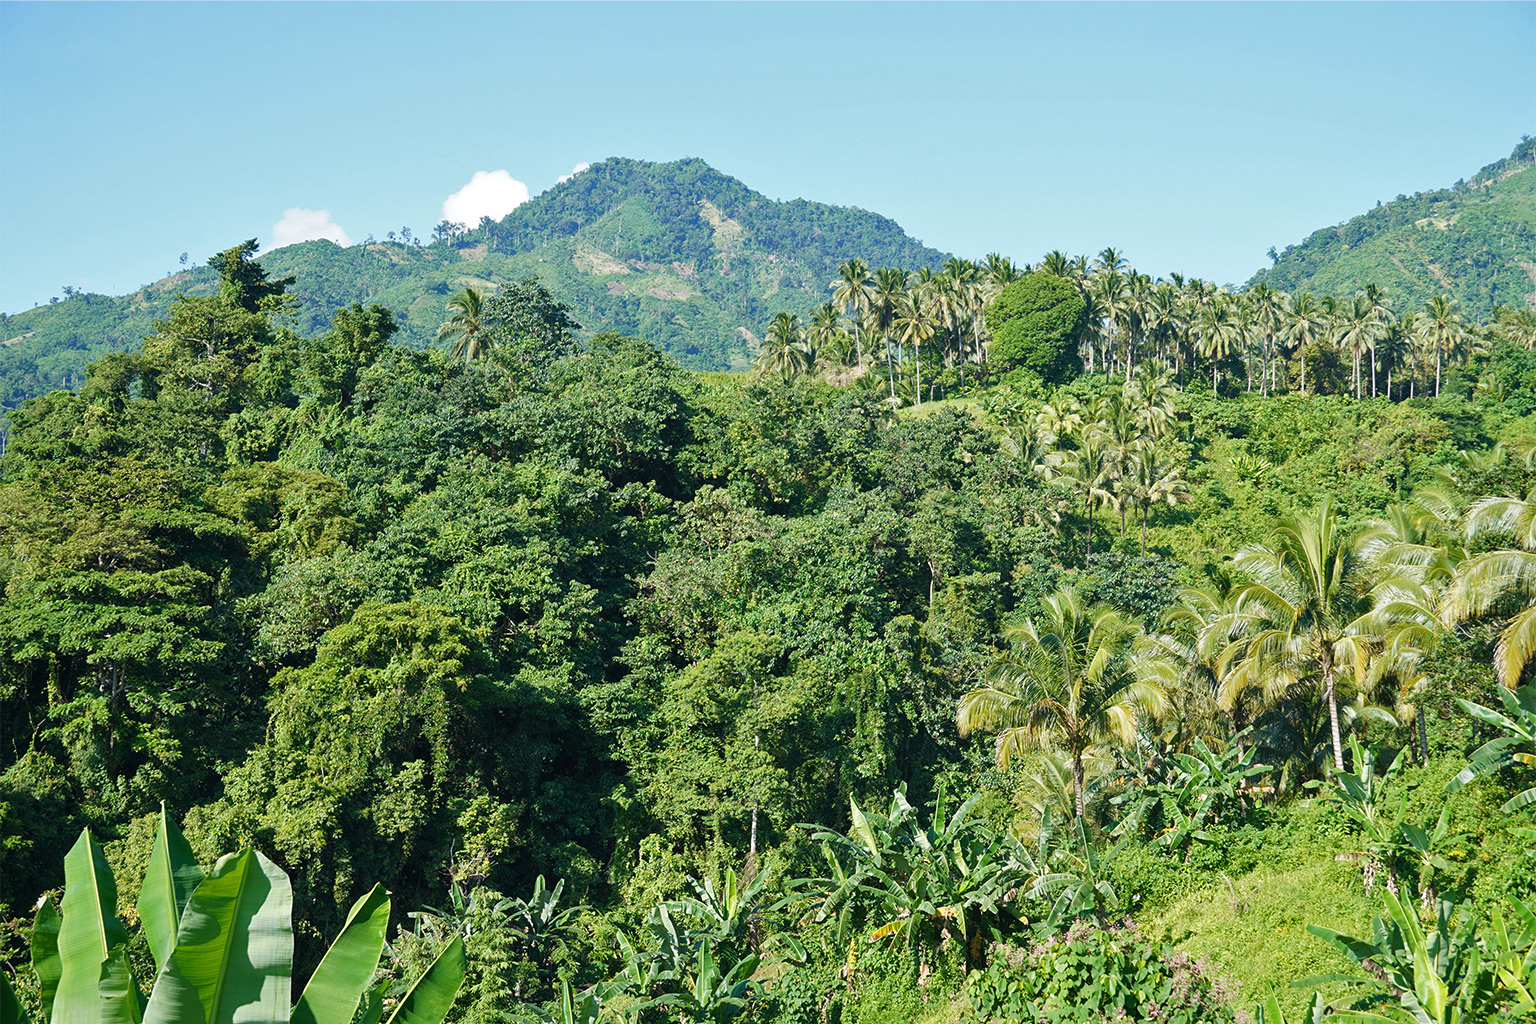 In Tatandayan, deep-rooted timber trees, fruit trees, and vegetable crops coexist in a thriving agroforestry system, reducing forest pressure and mitigating surface runoff, nutrient leaching, and soil erosion.